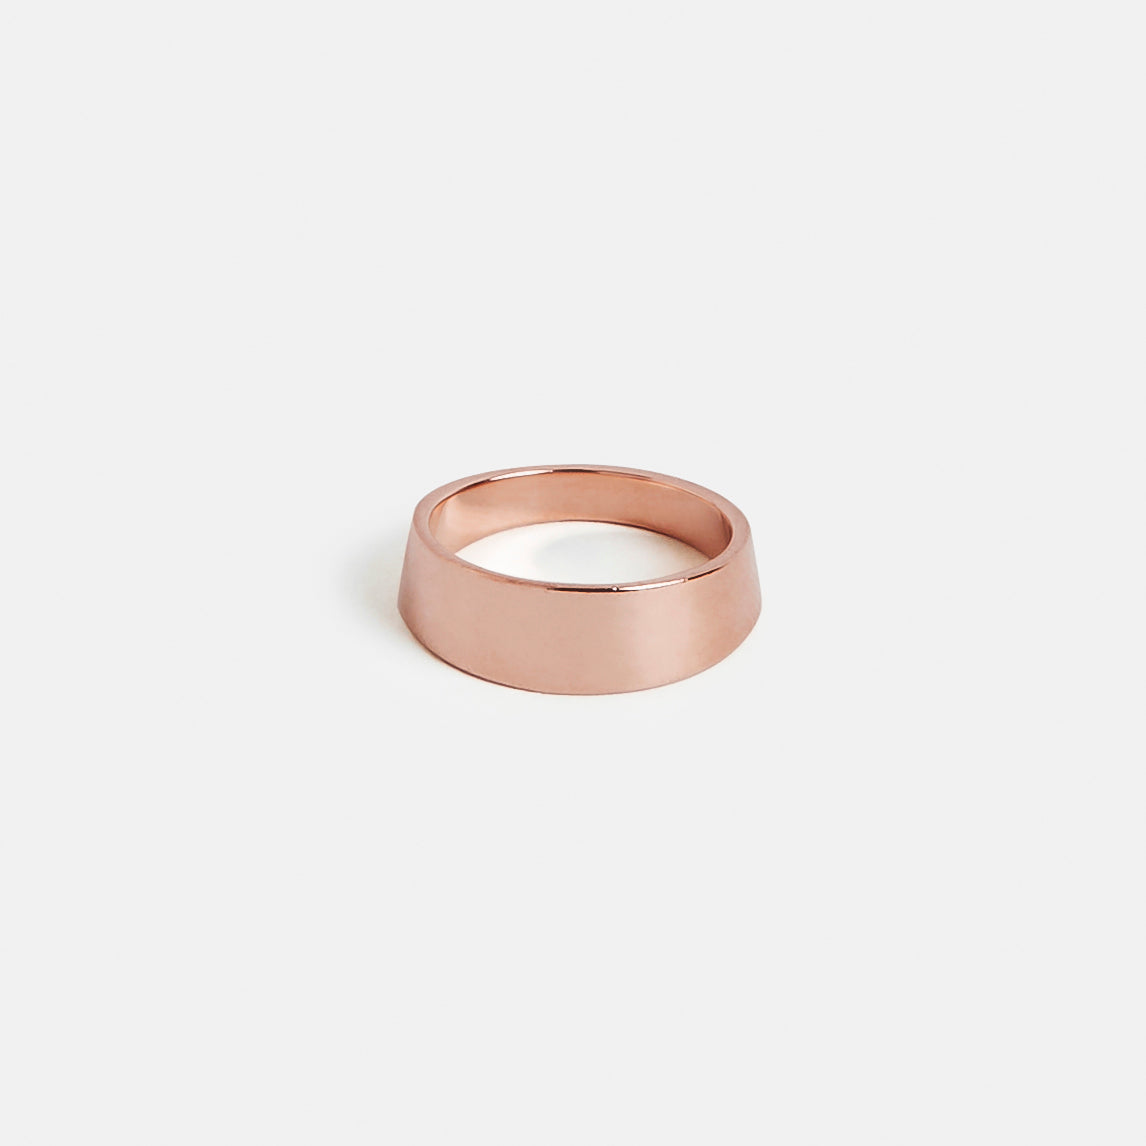 Riva Unique Ring in 14k Rose Gold By SHW Fine Jewelry New York City